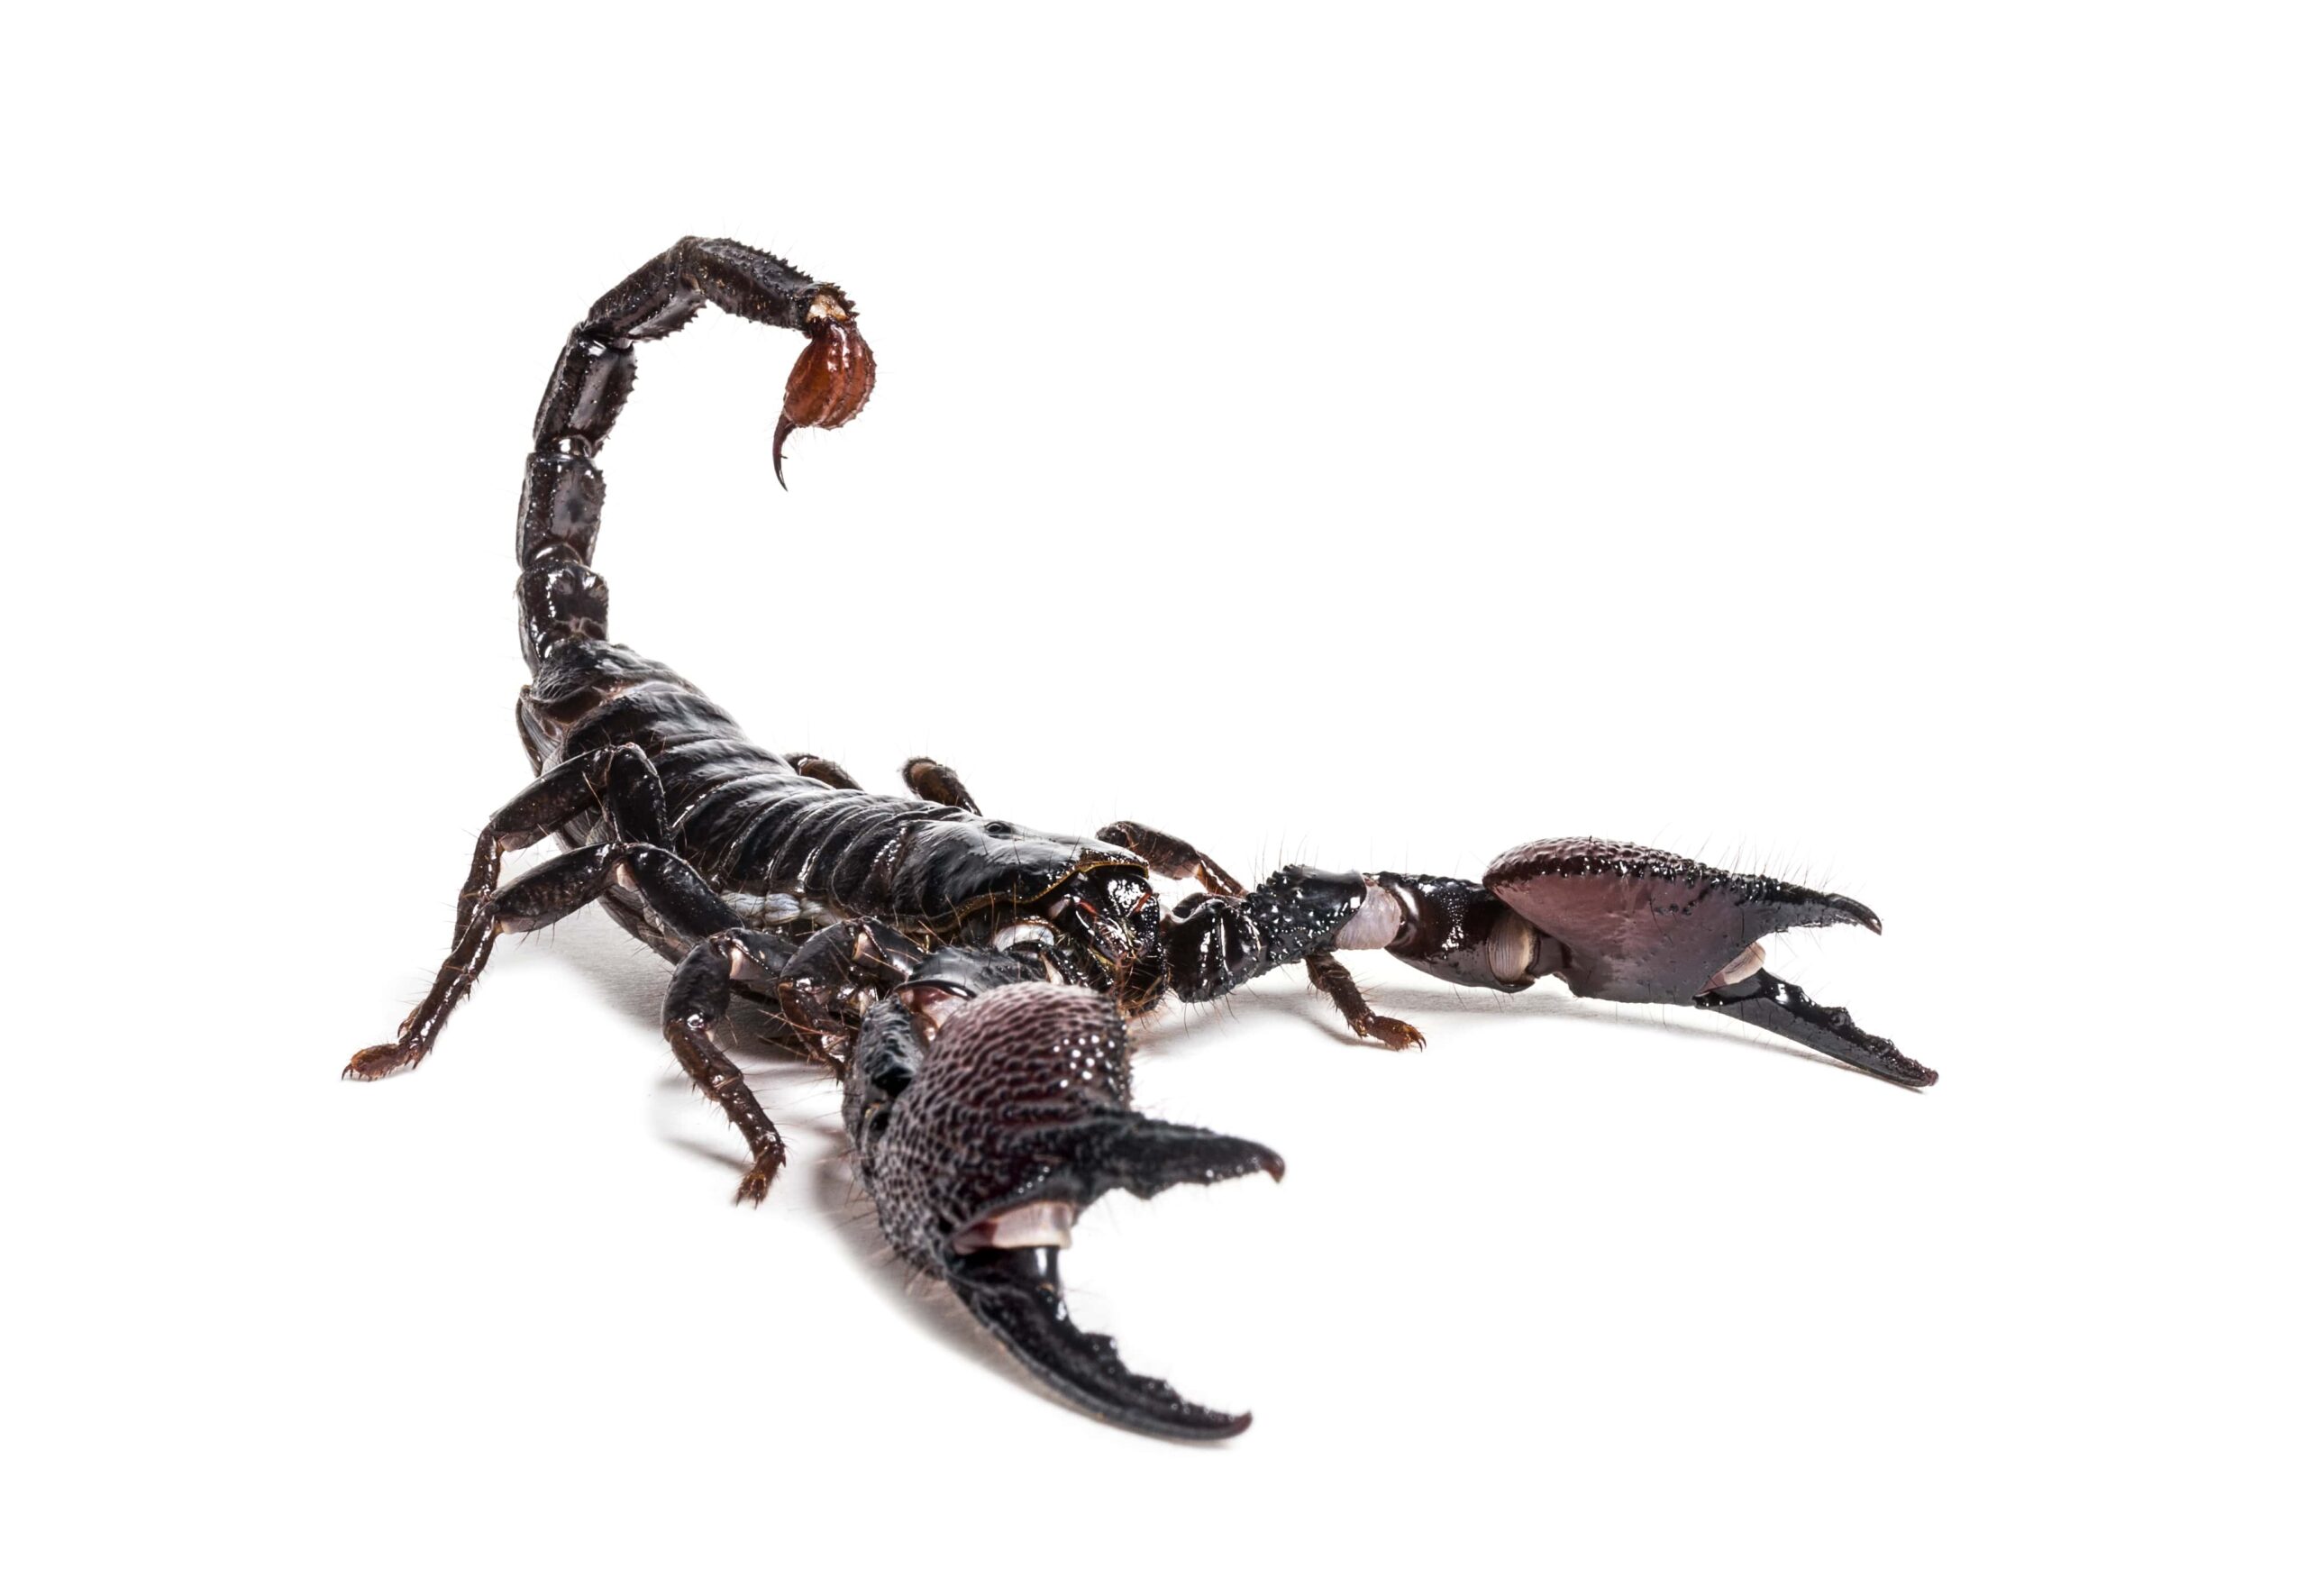 Blue Emperor Scorpion” - One of the largest scorpion in the world